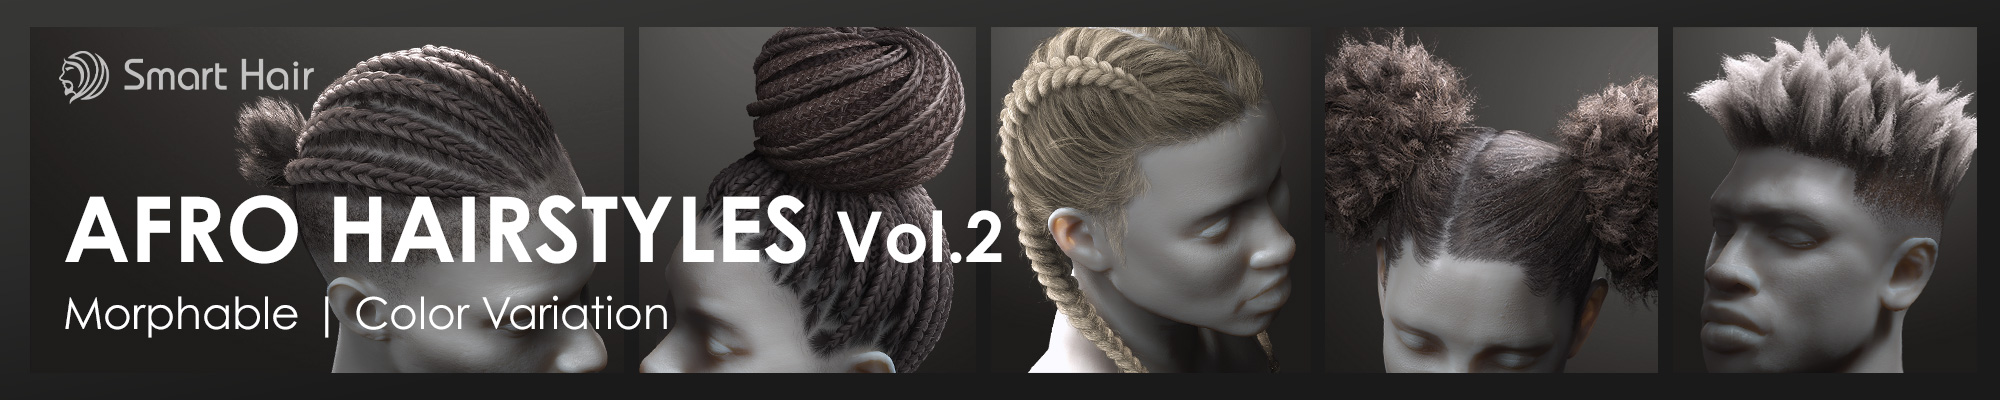 afro-hairstyles-v2